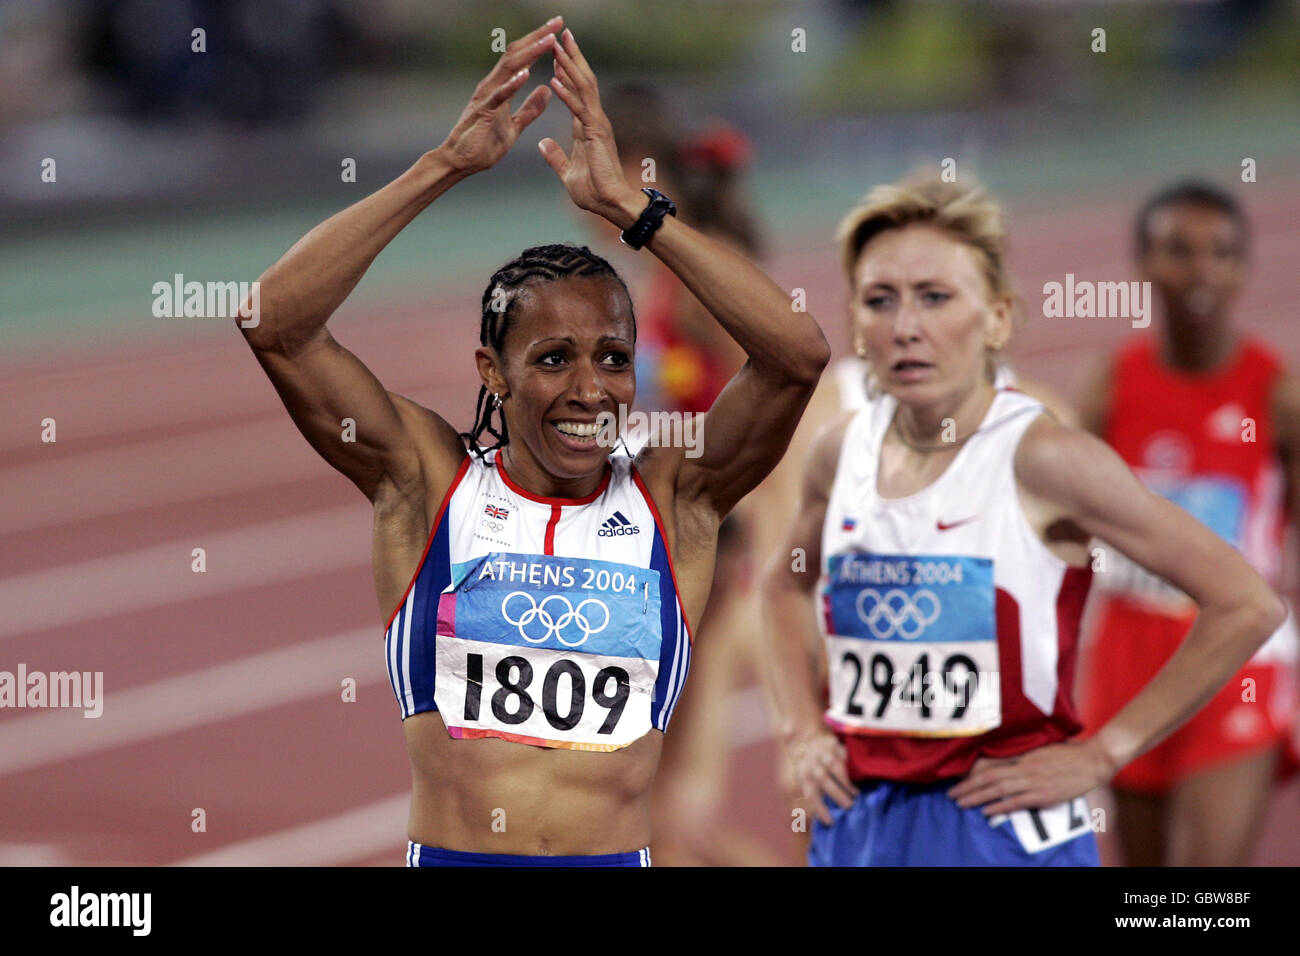 Athletics - Athens Olympic Games 2004 - Women's 1500m - Final Stock Photo